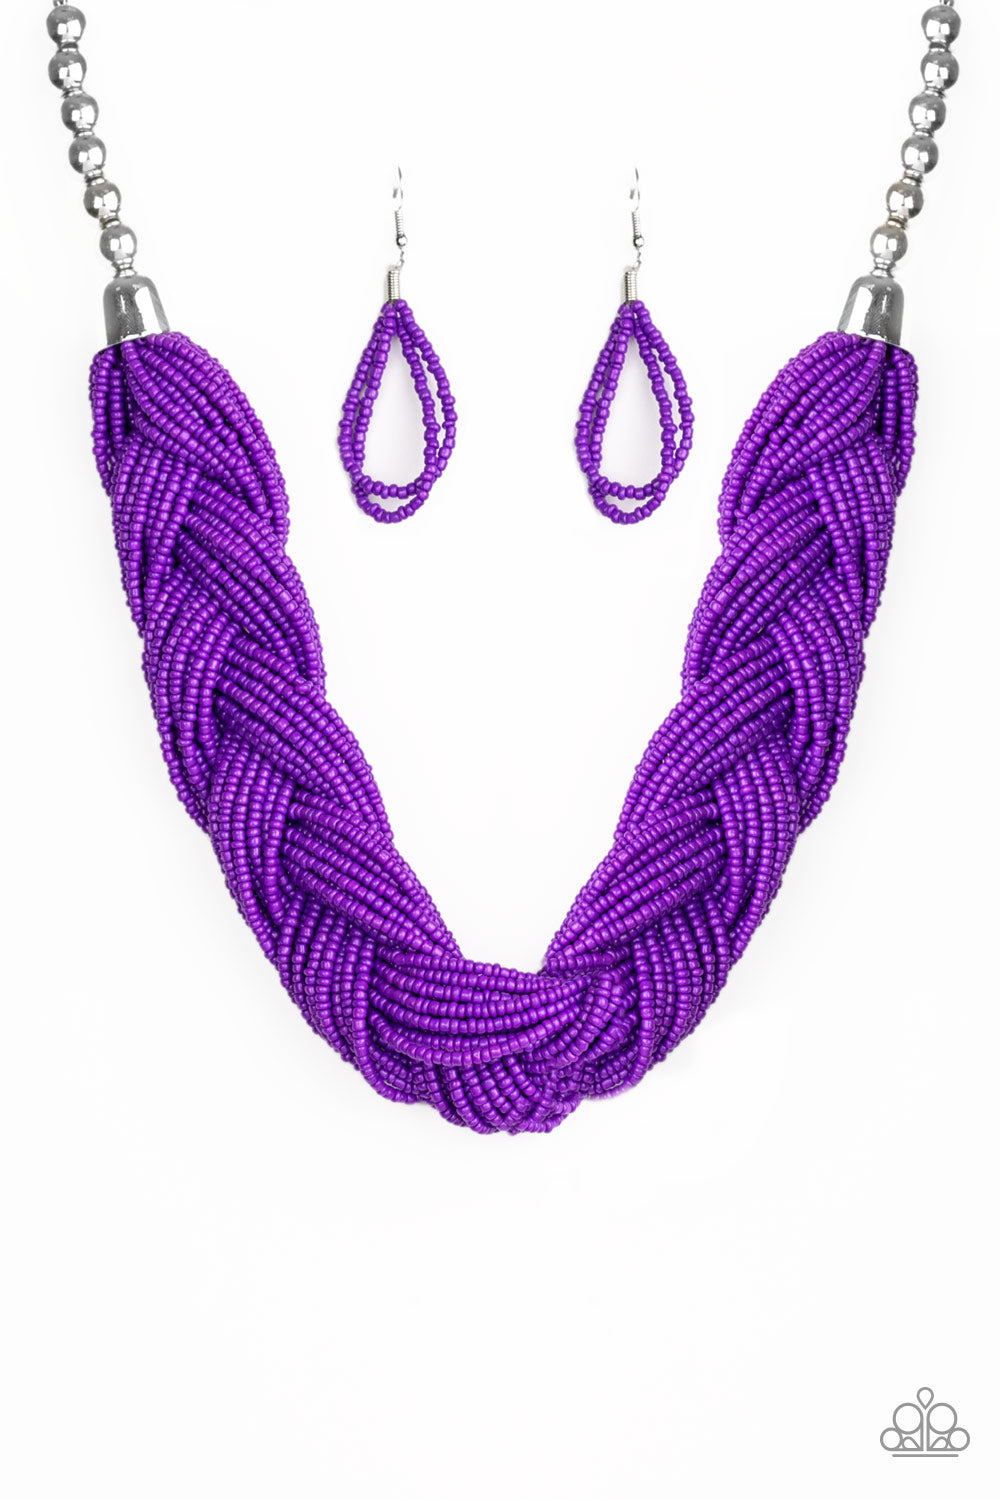 Brushed in a vivacious purple hue, countless seed beads weave into an indigenous braid below the collar. The colorful strands attach to large silver beads, adding a hint of metallic shimmer to the playful design. Features an adjustable clasp closure.